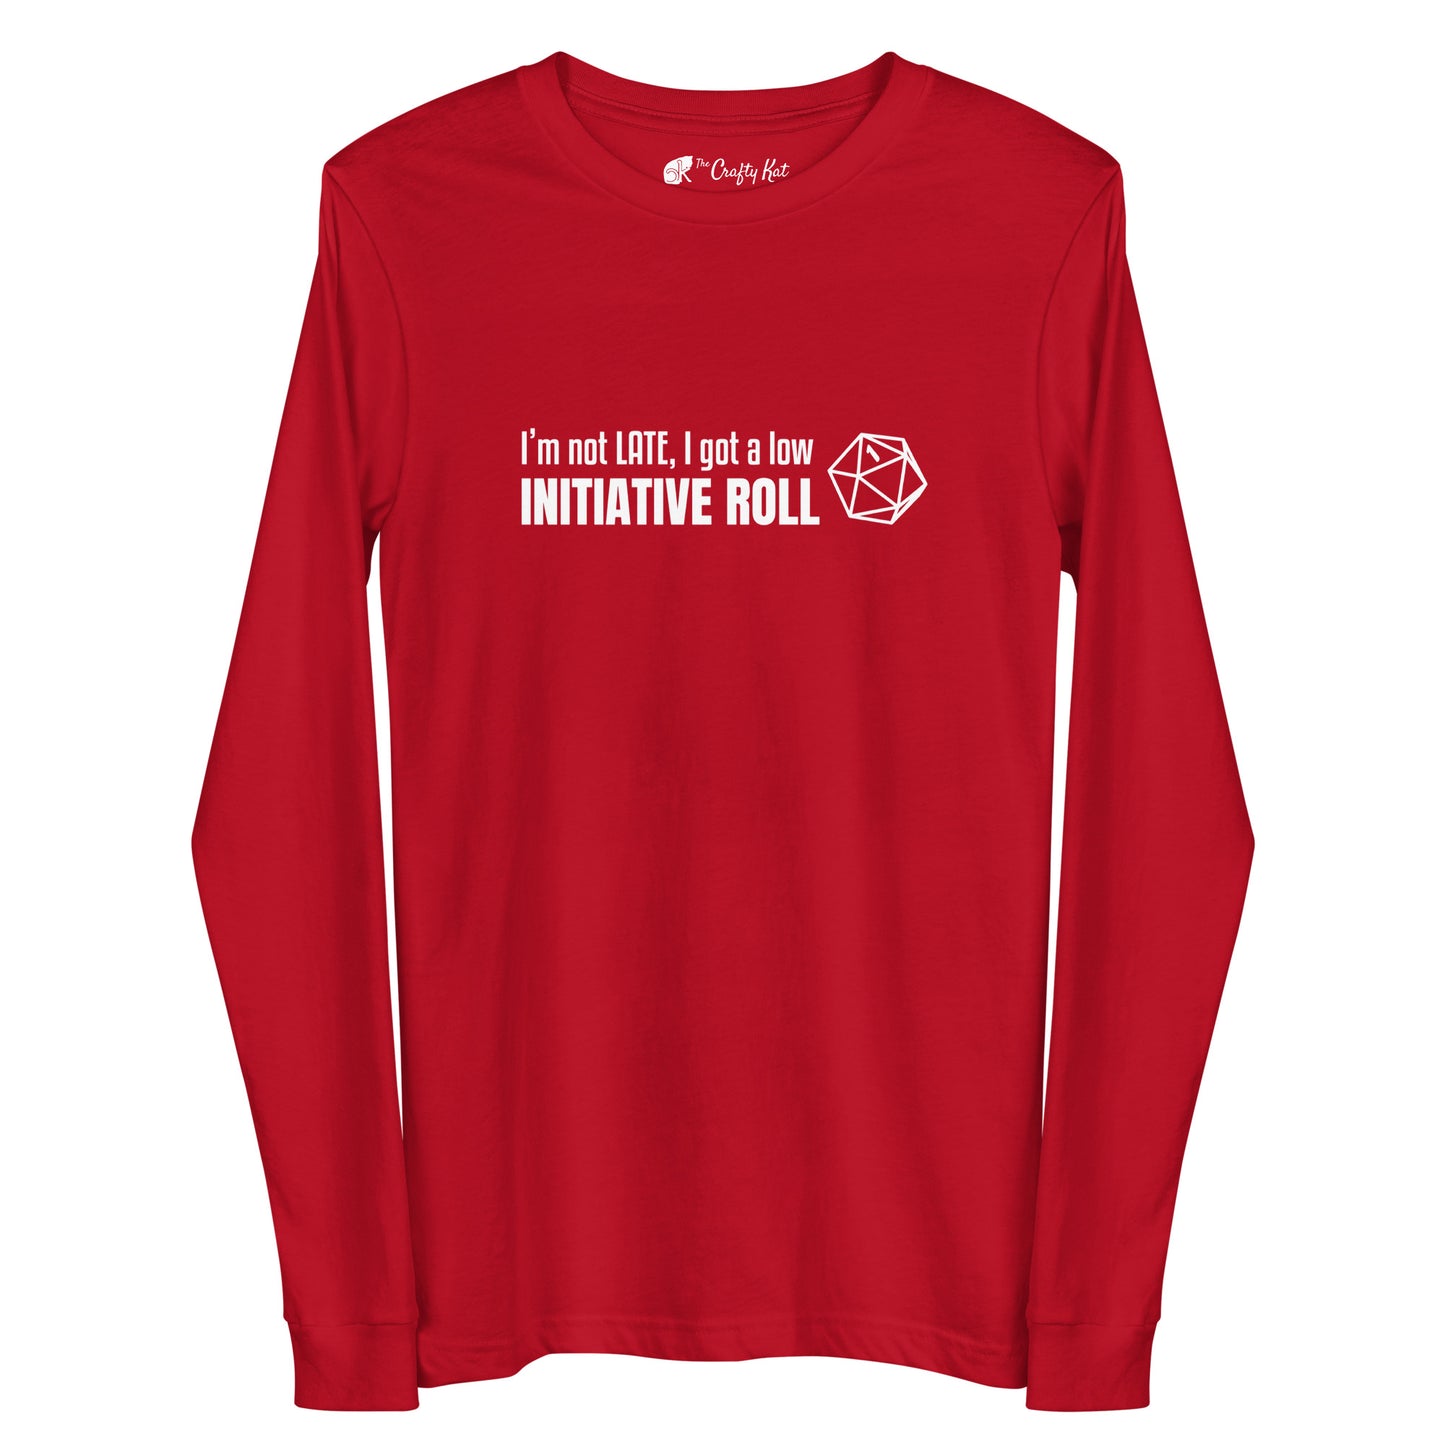 Red long-sleeve tee with a graphic of a d20 (twenty-sided die) showing a roll of "1" and text: "I'm not LATE, I got a low INITIATIVE ROLL"